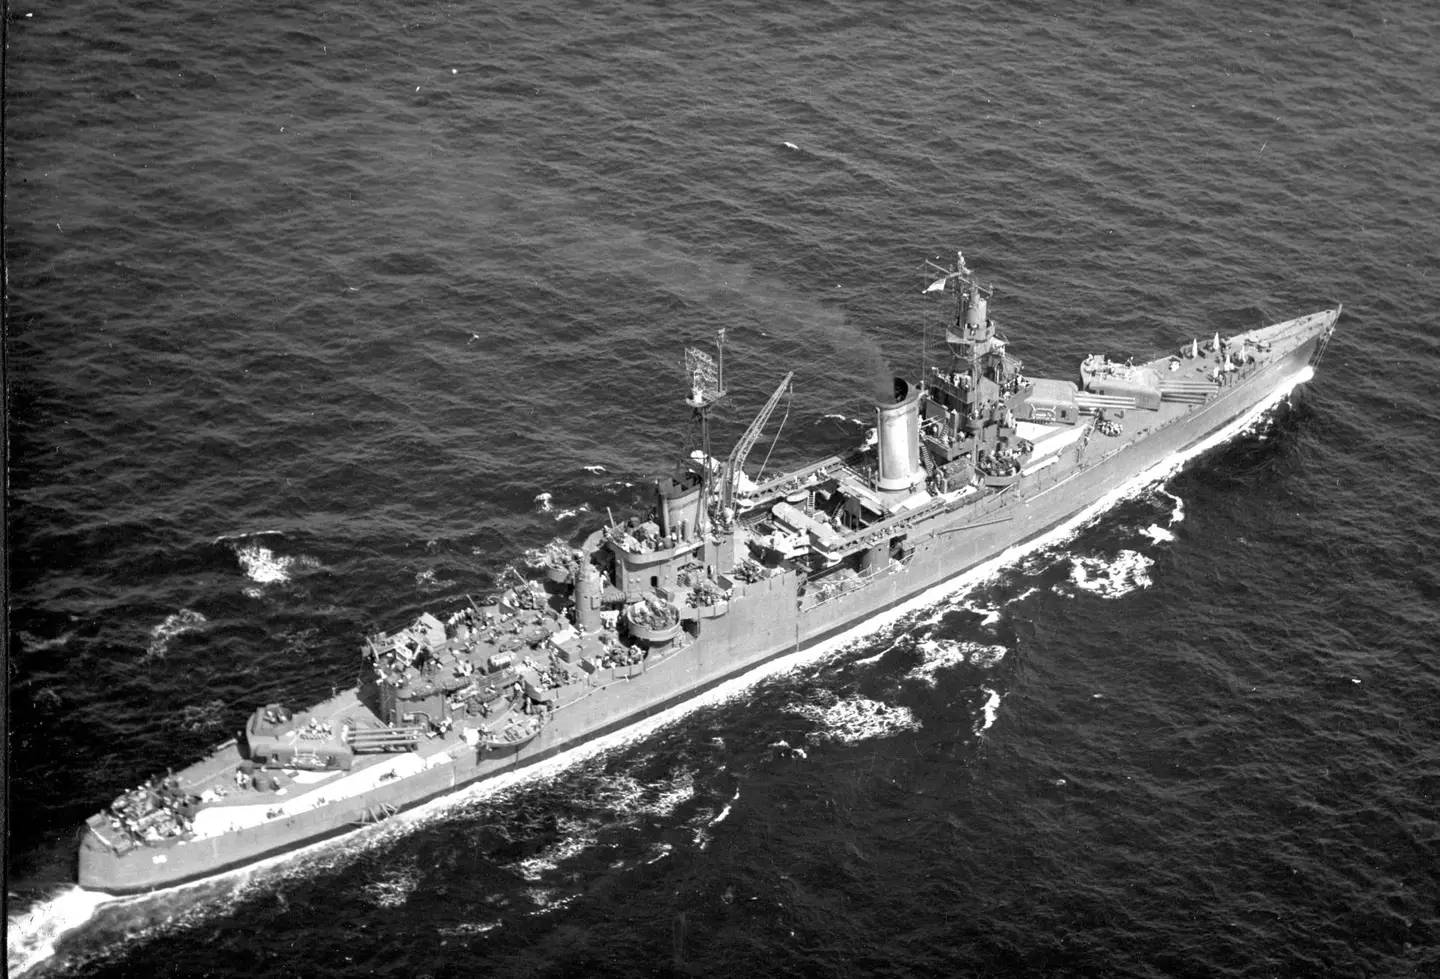 The USS Indianapolis in 1945, shortly before it was sunk to the bottom of the Pacific Ocean.